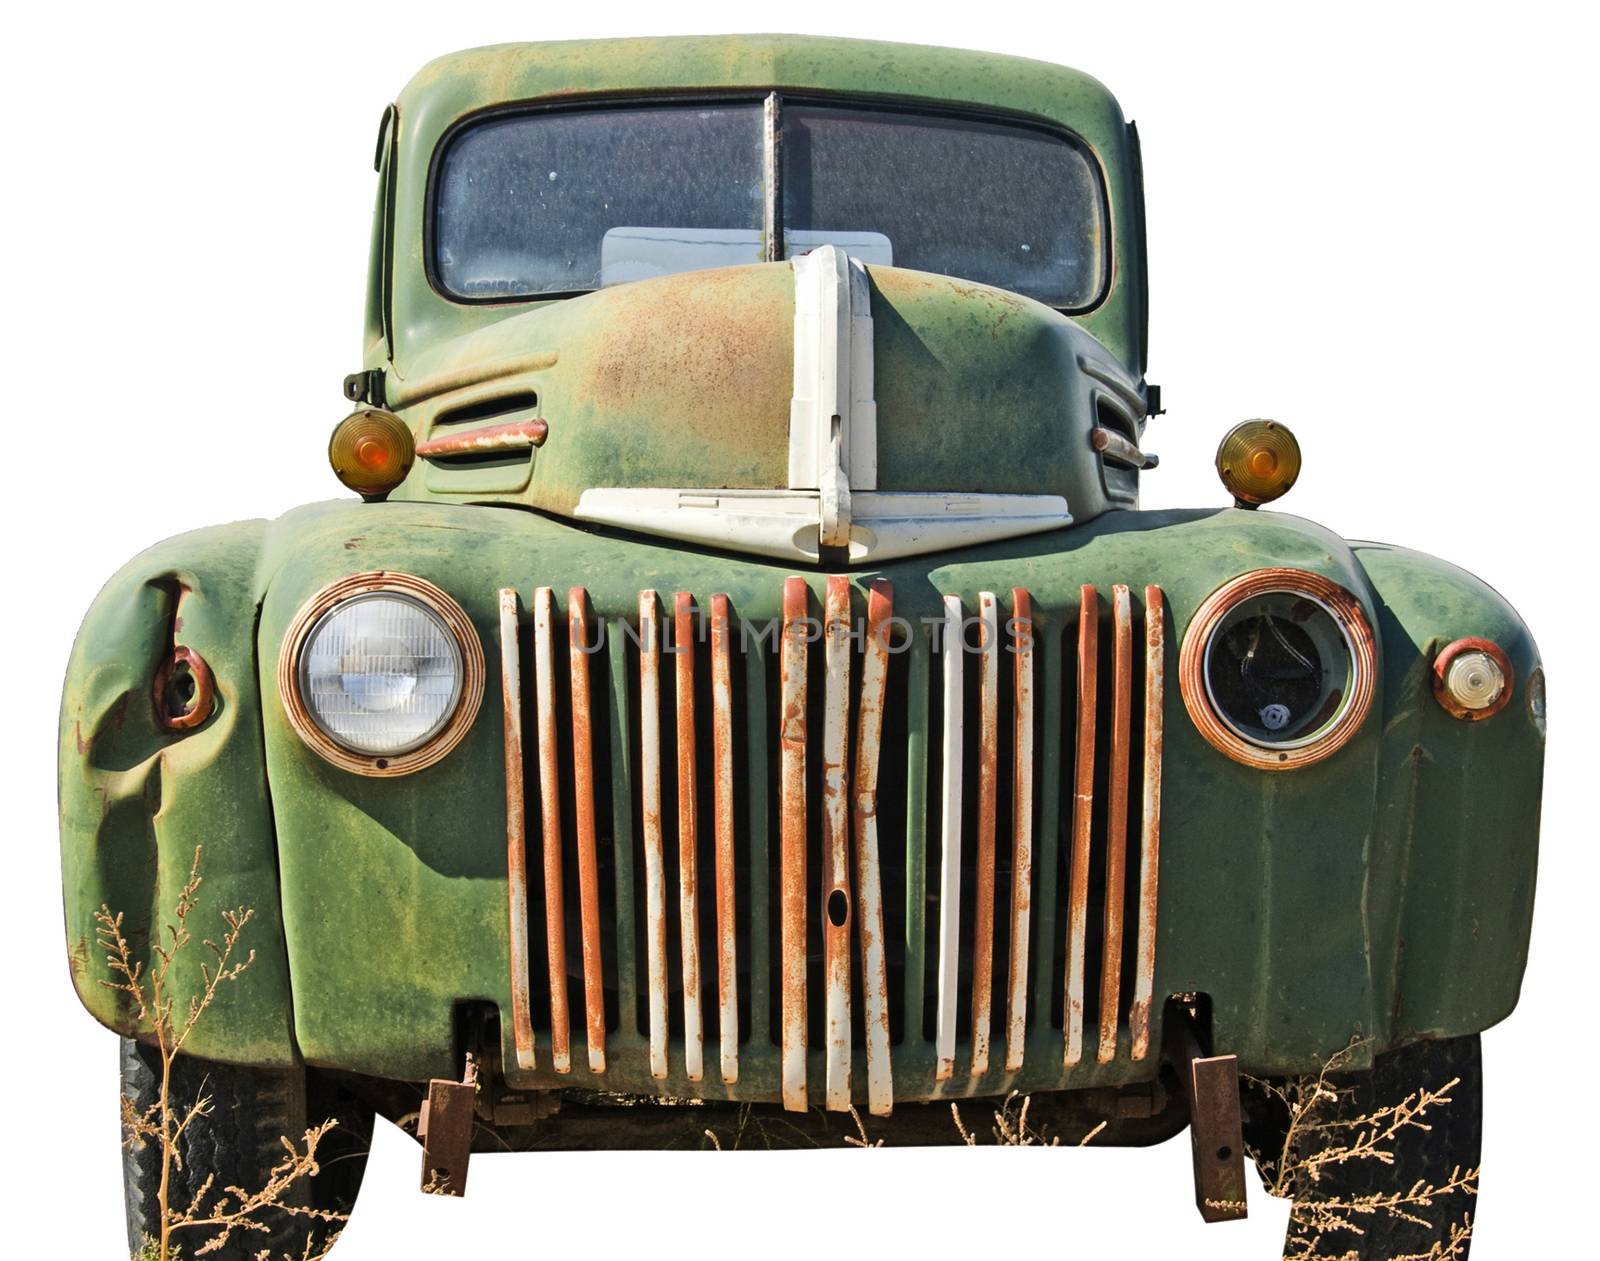 Dented up pick up truck cut out of a junkyard. Isolated on white with a clipping path